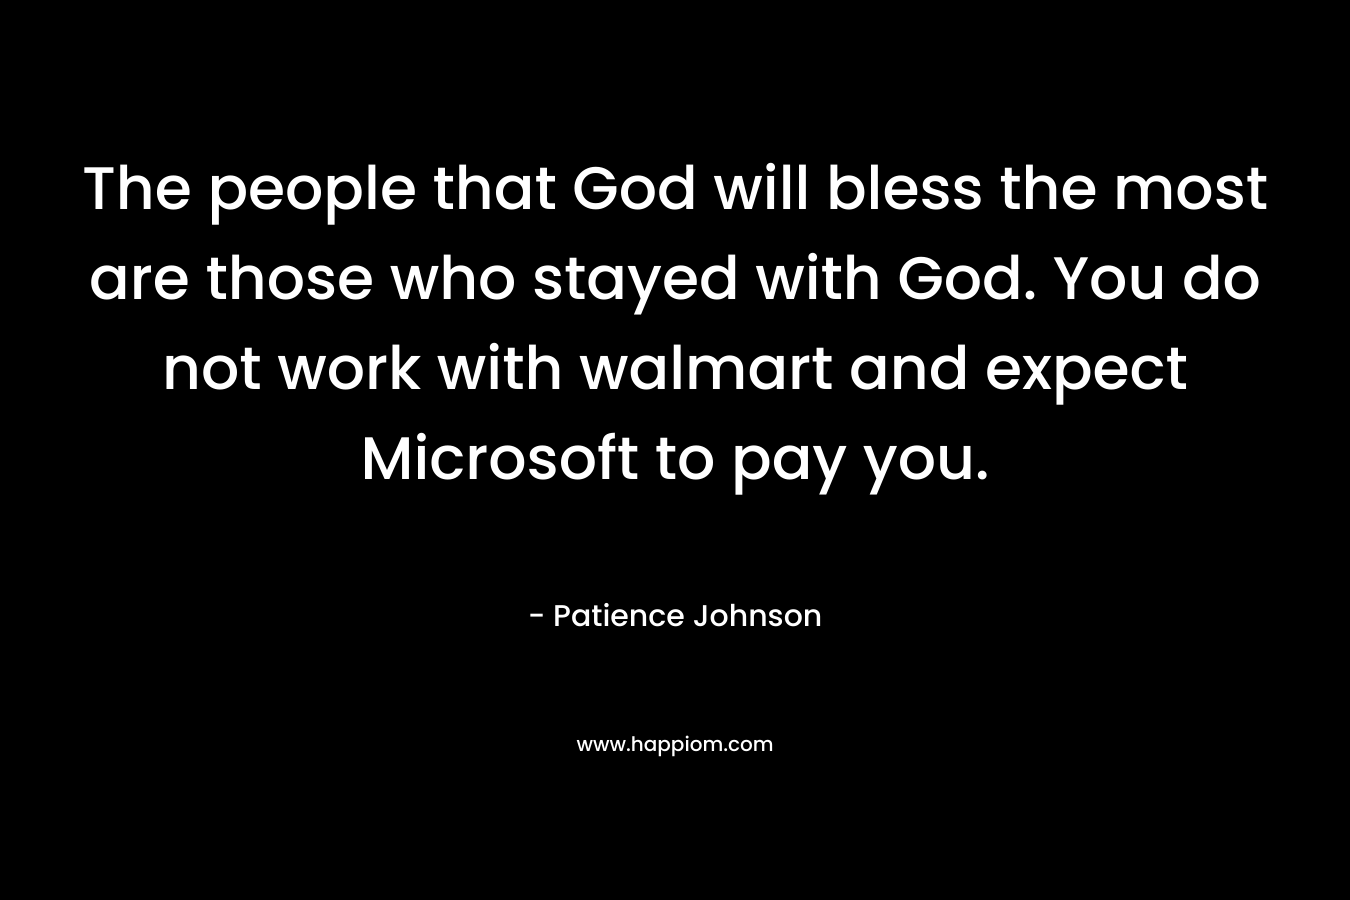 The people that God will bless the most are those who stayed with God. You do not work with walmart and expect Microsoft to pay you. – Patience Johnson